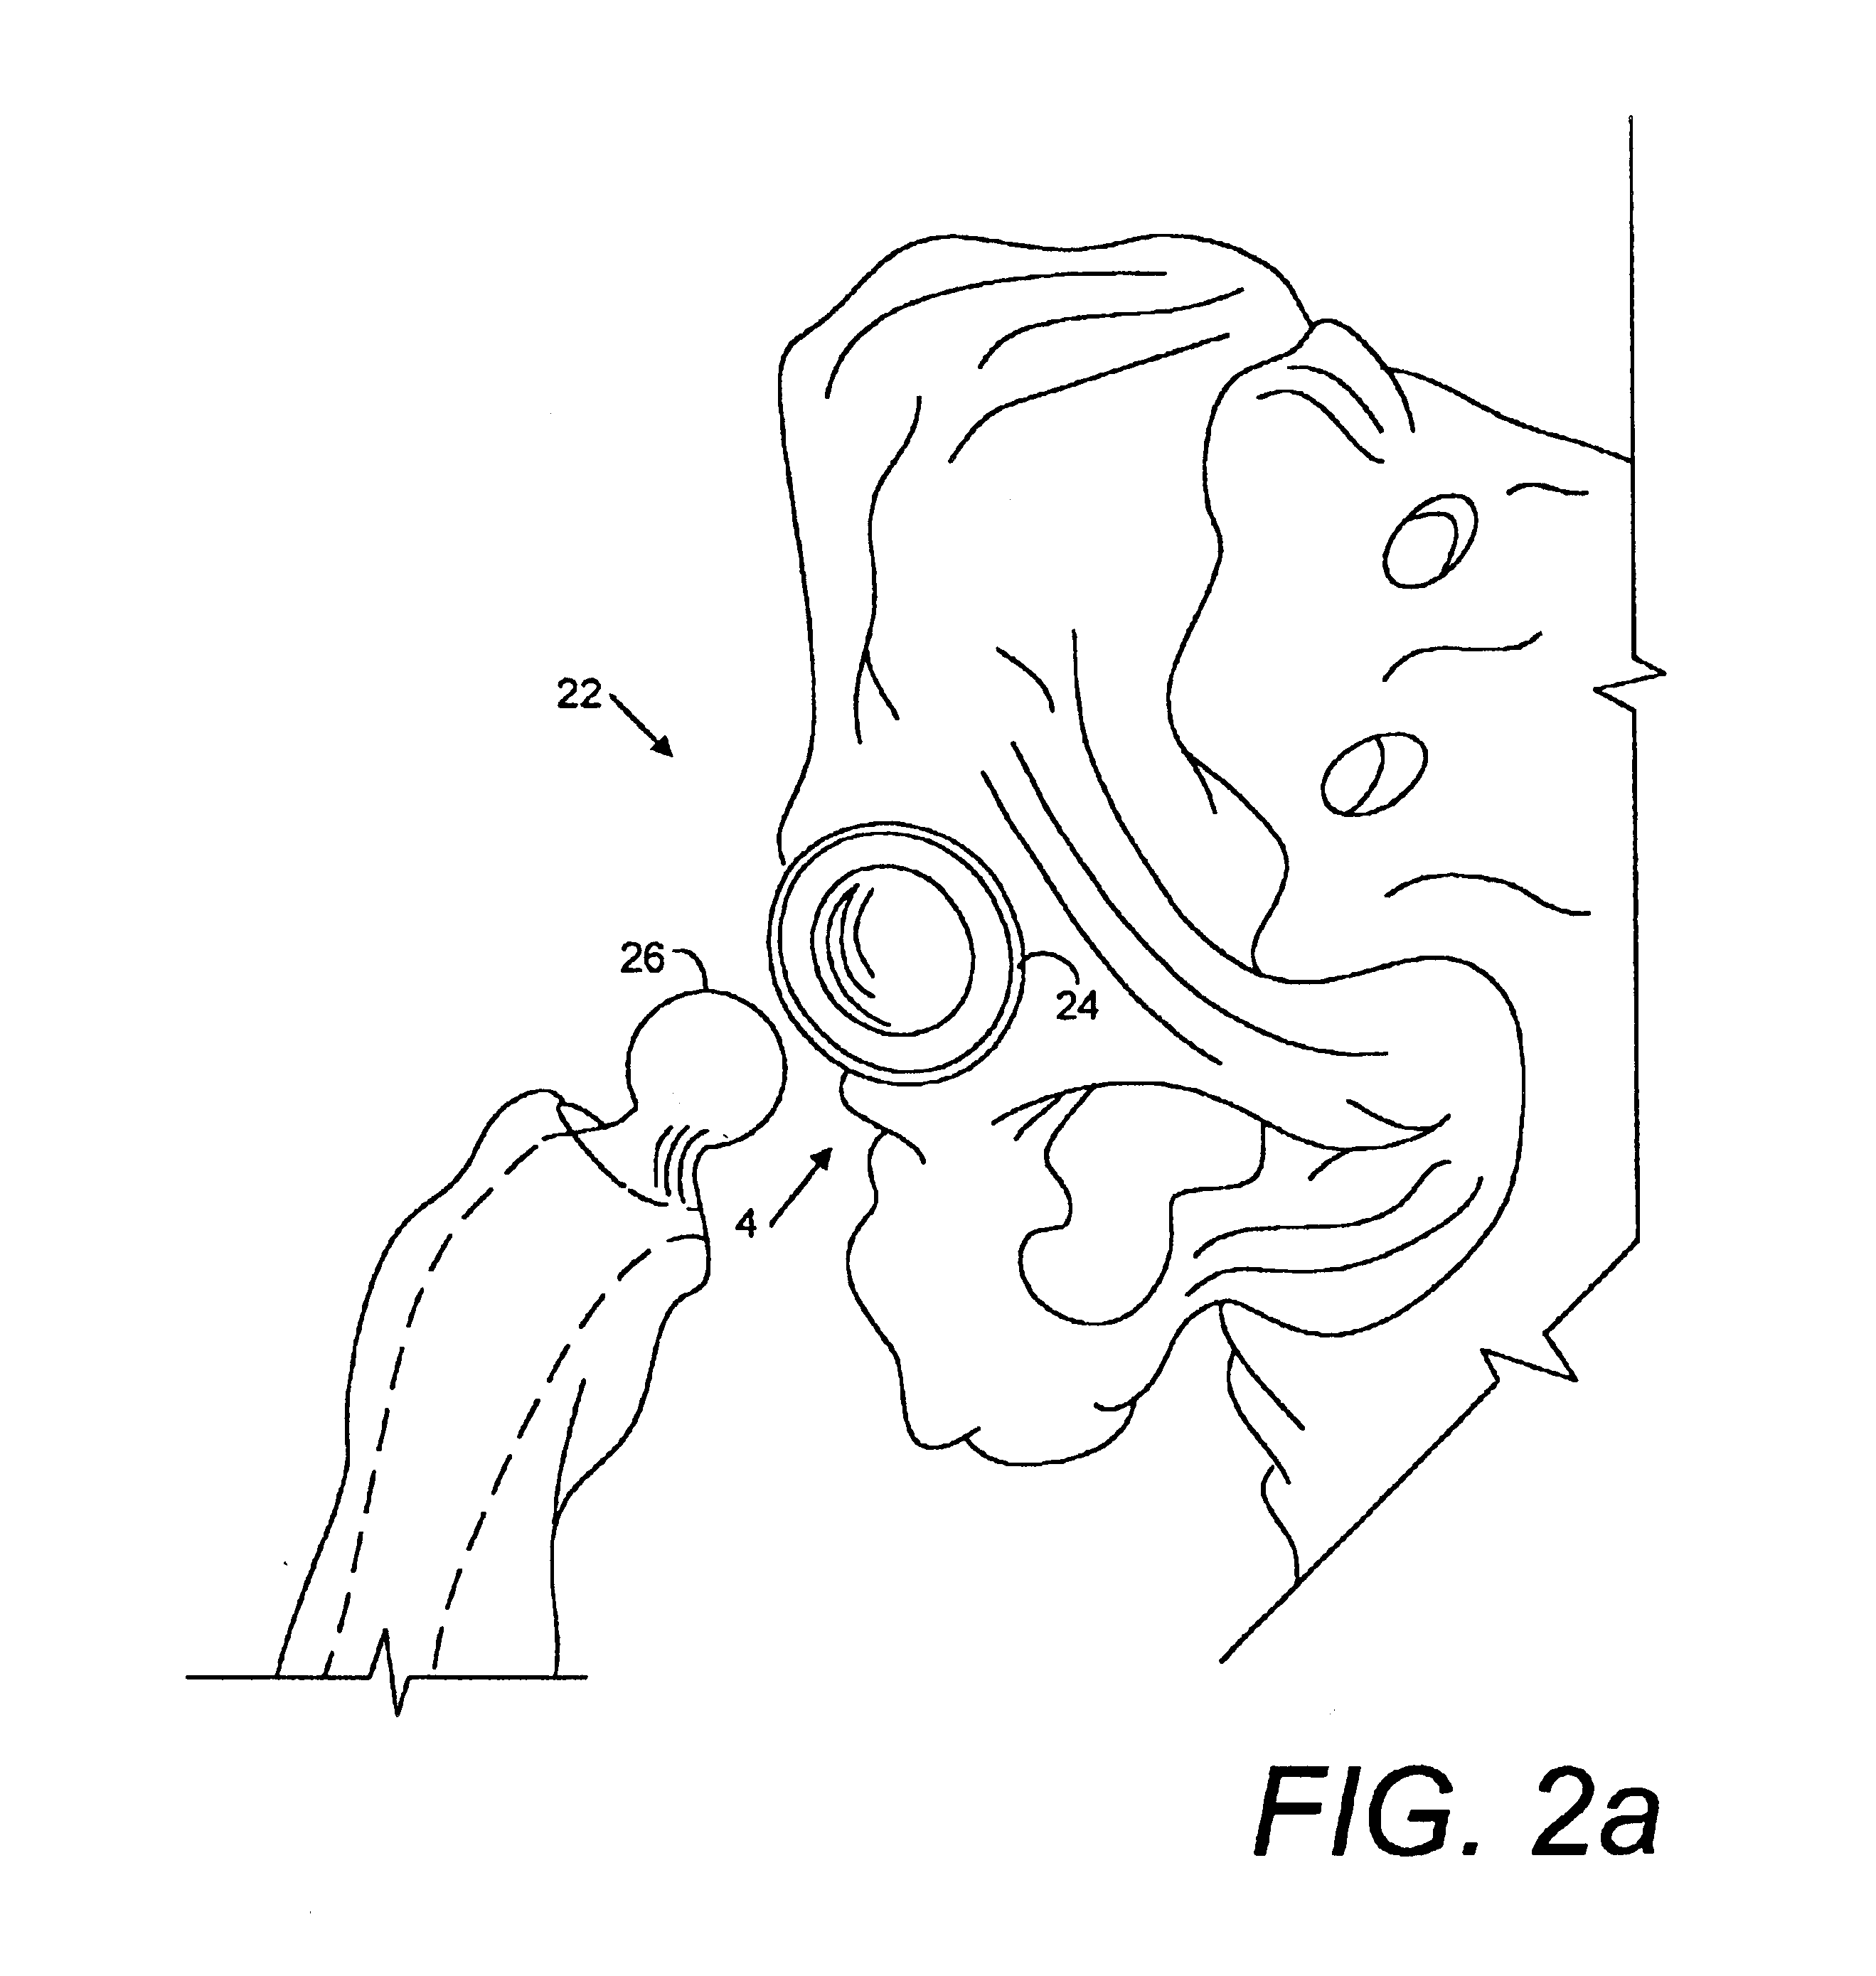 Porous implant system and treatment method